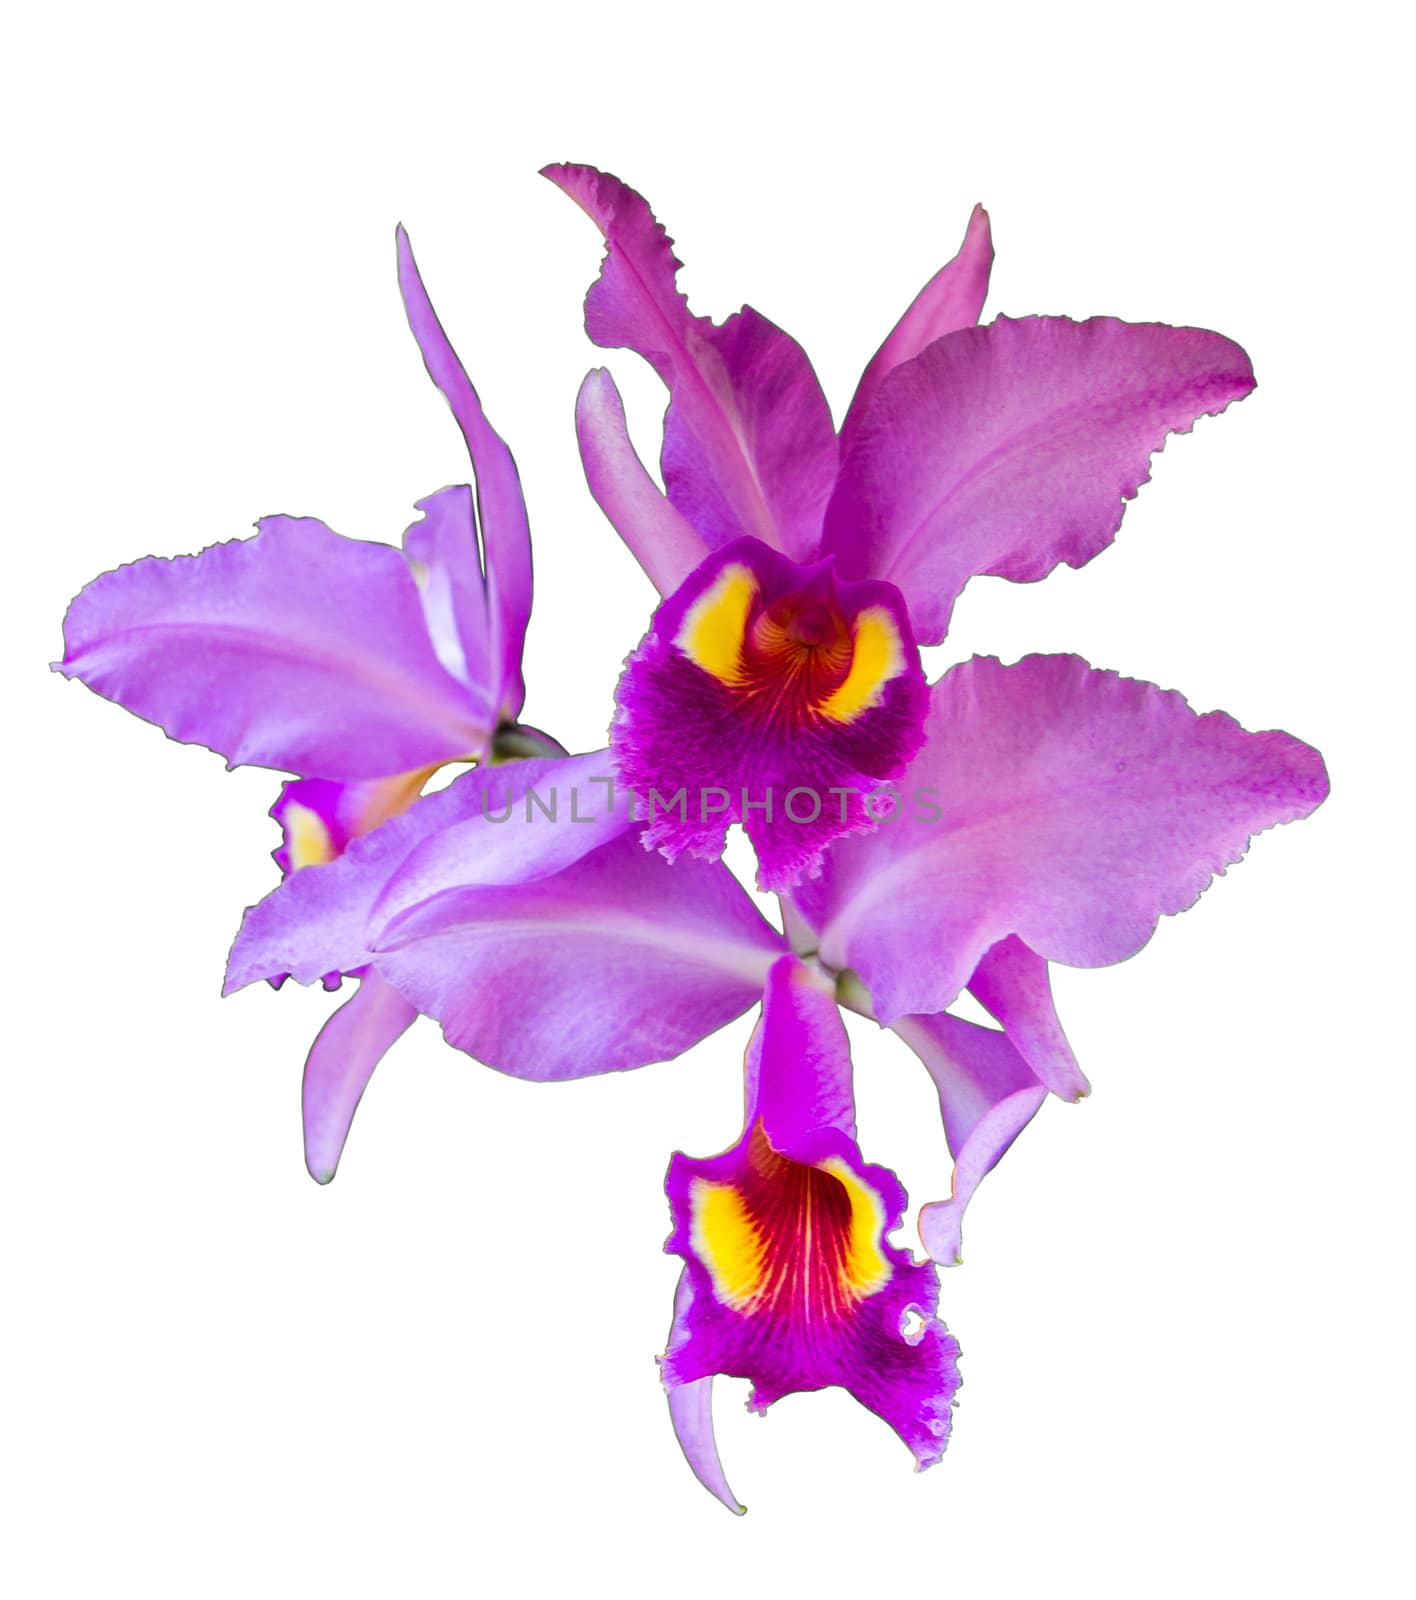 Orchid on isolate by bunwit